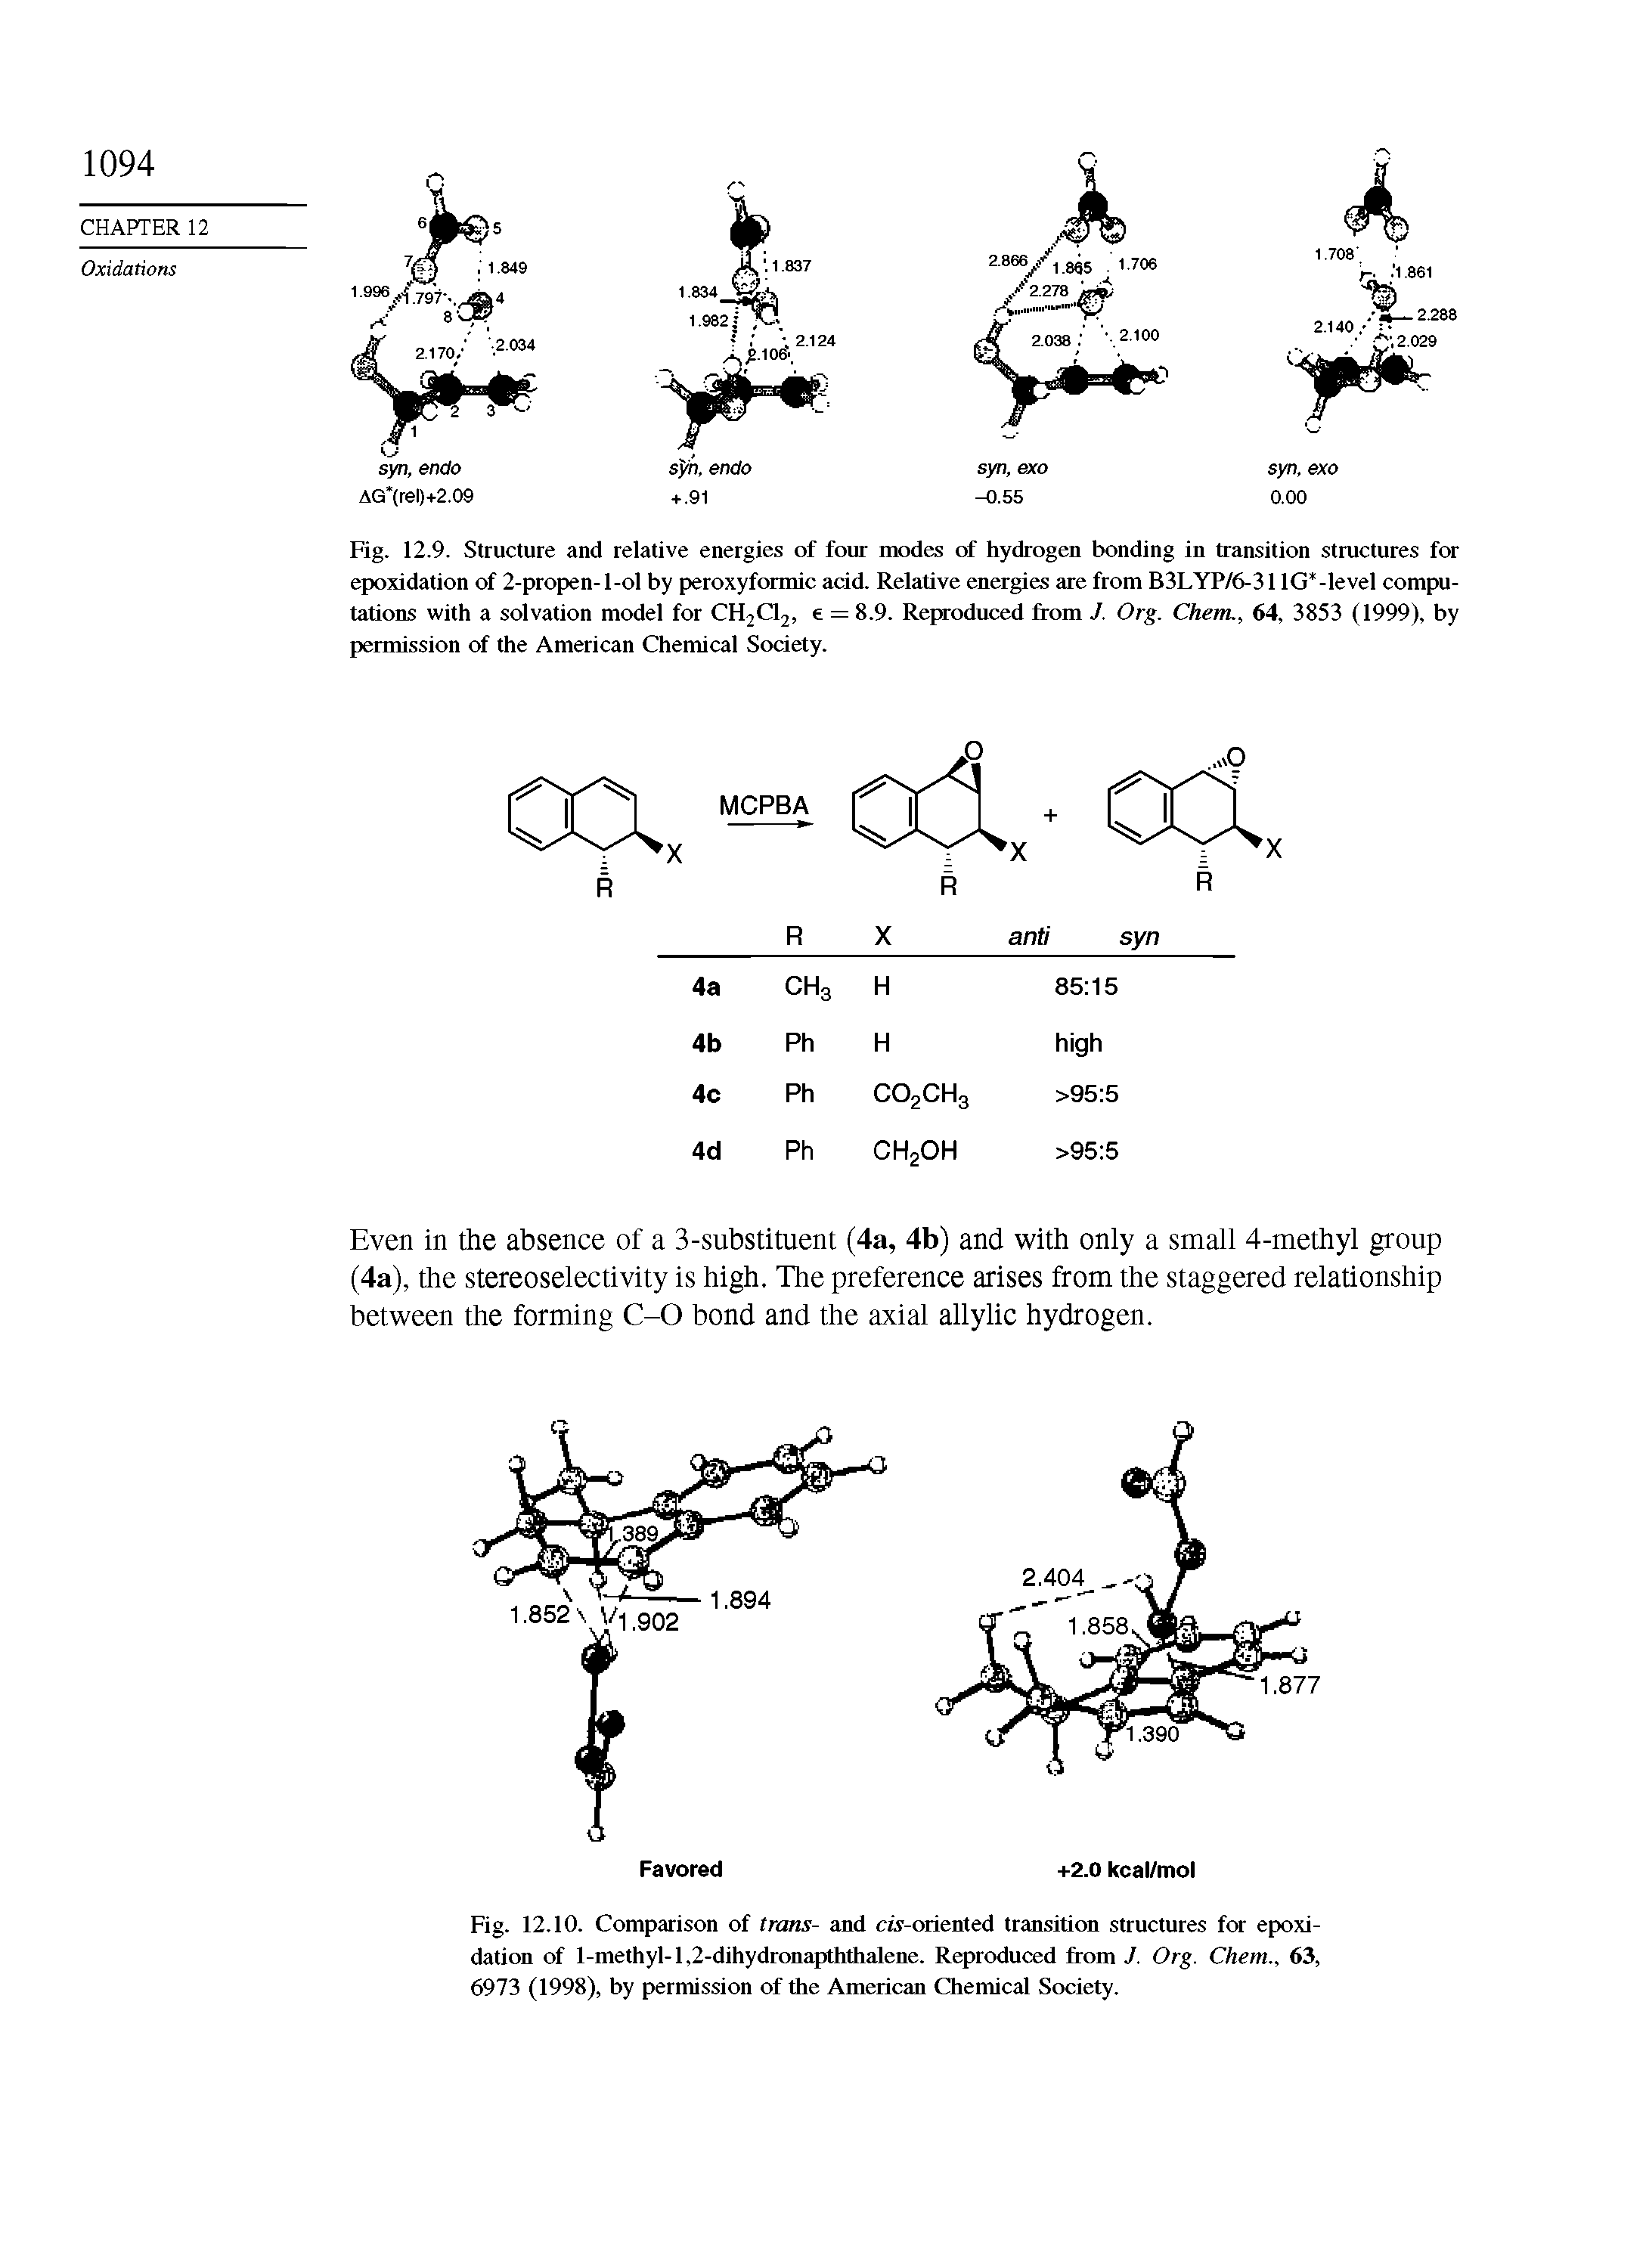 Fig. 12.9. Structure and relative energies of four modes of hydrogen bonding in transition structures for epoxidation of 2-propen-l-ol by peroxyformic acid. Relative energies are from B3I.YP/6-311G -level computations with a solvation model for CH2C12, e = 8.9. Reproduced from / Org. Chem., 64, 3853 (1999), by permission of the American Chemical Society.